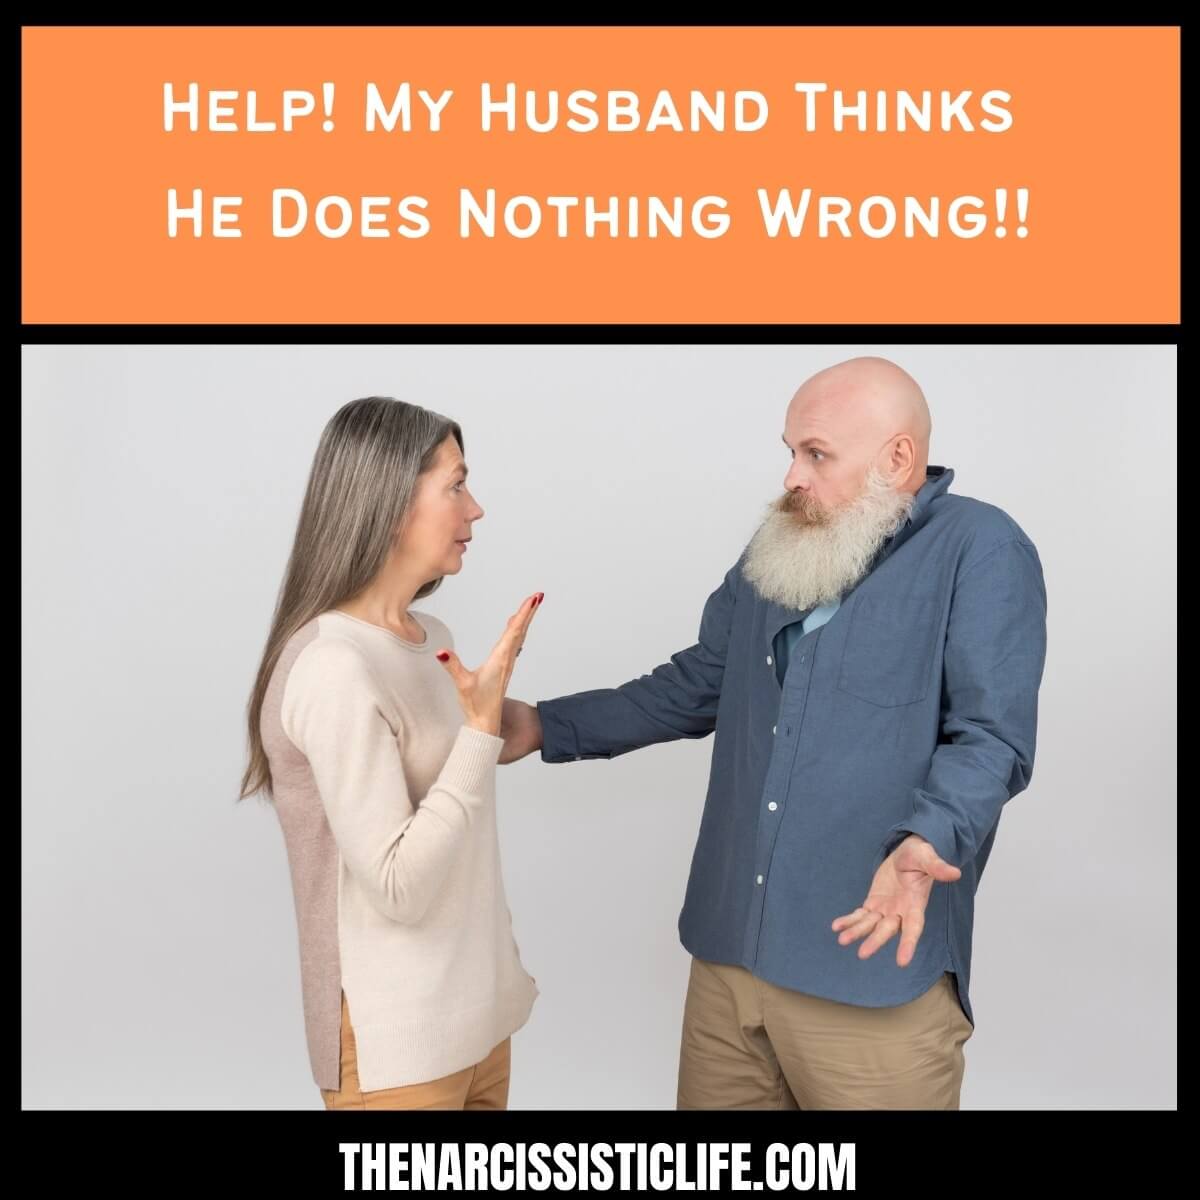 Help! My Husband Thinks He Does Nothing Wrong